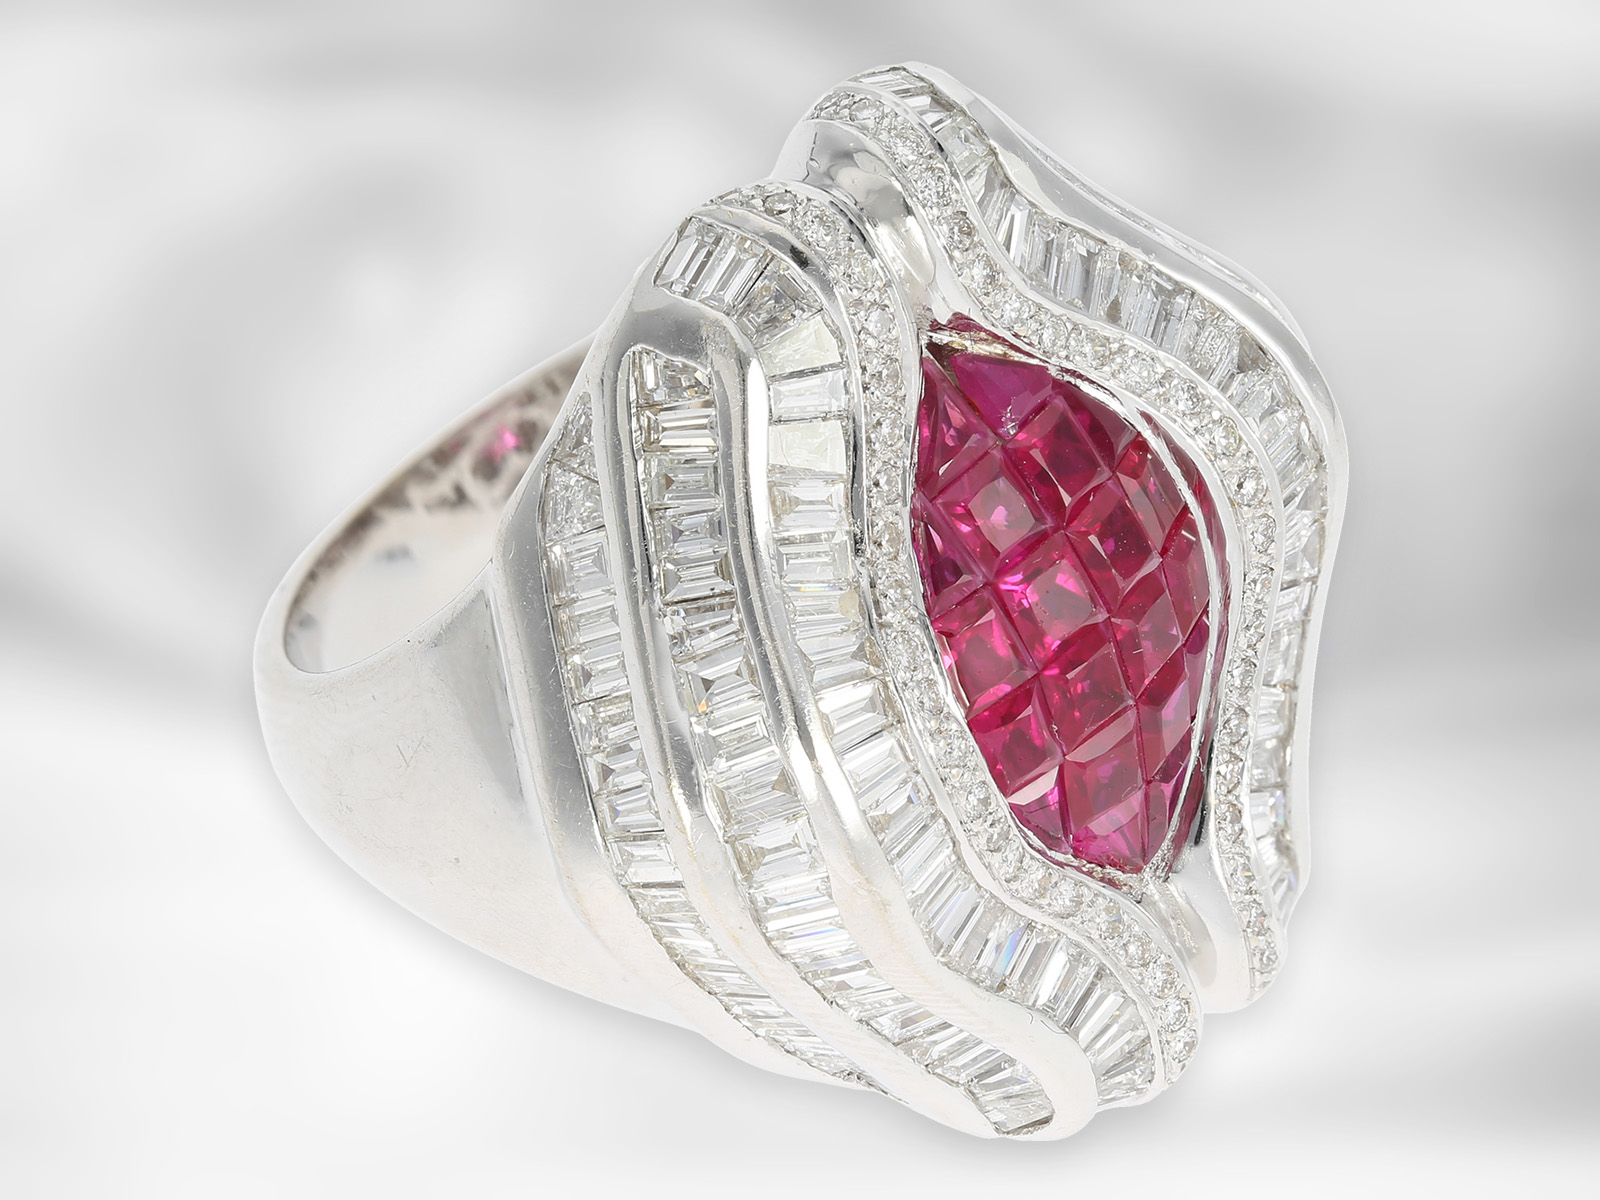 Ring: extravagant luxurious diamond/ruby ring, total approx. 5.49ct, 18K white gold, sophisticated g